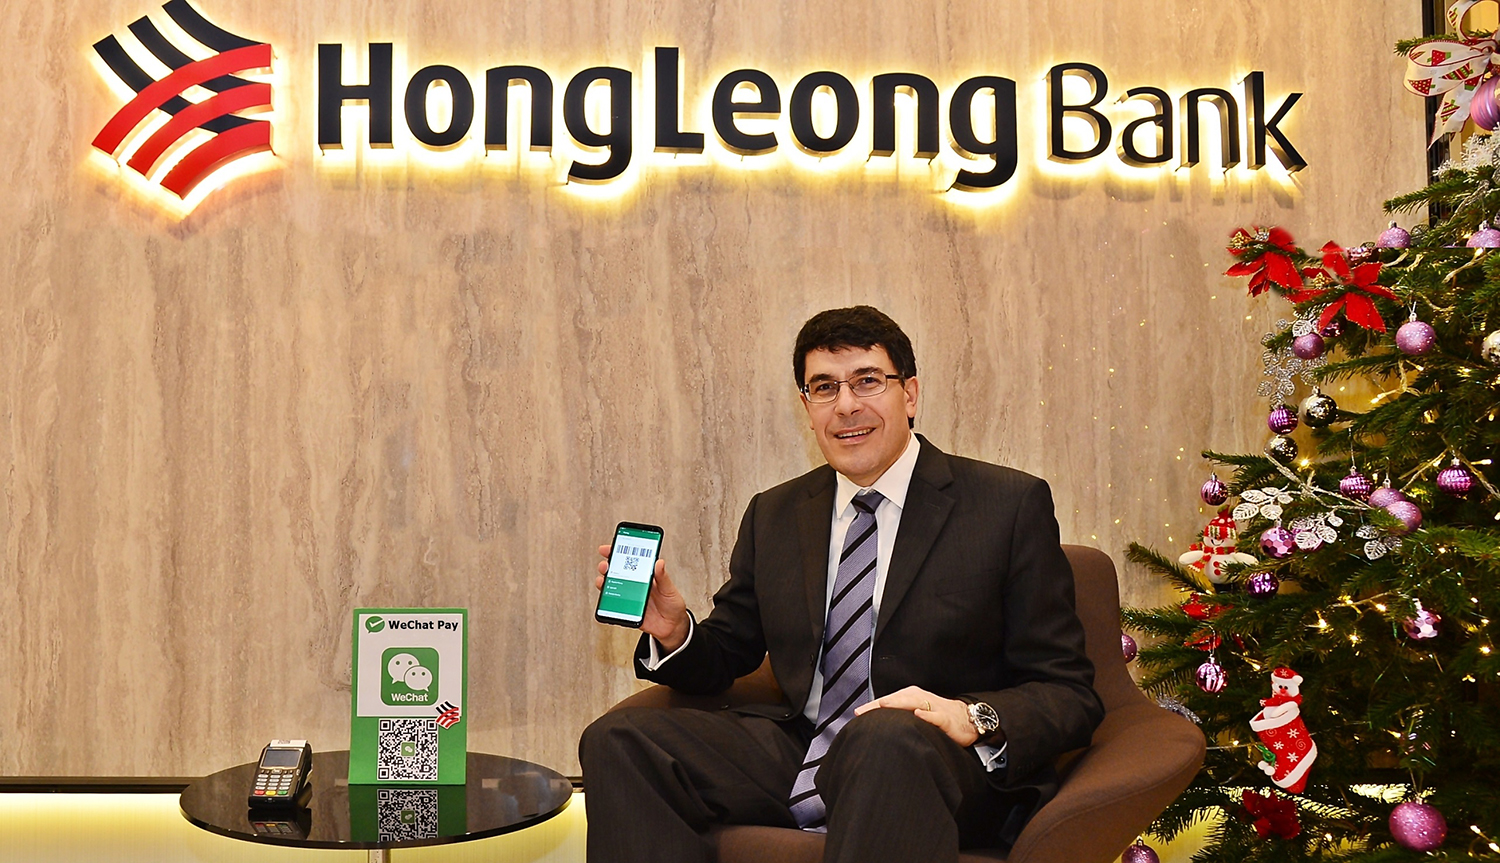 Hong Leong Bank enables merchants to accept WeChat Pay 